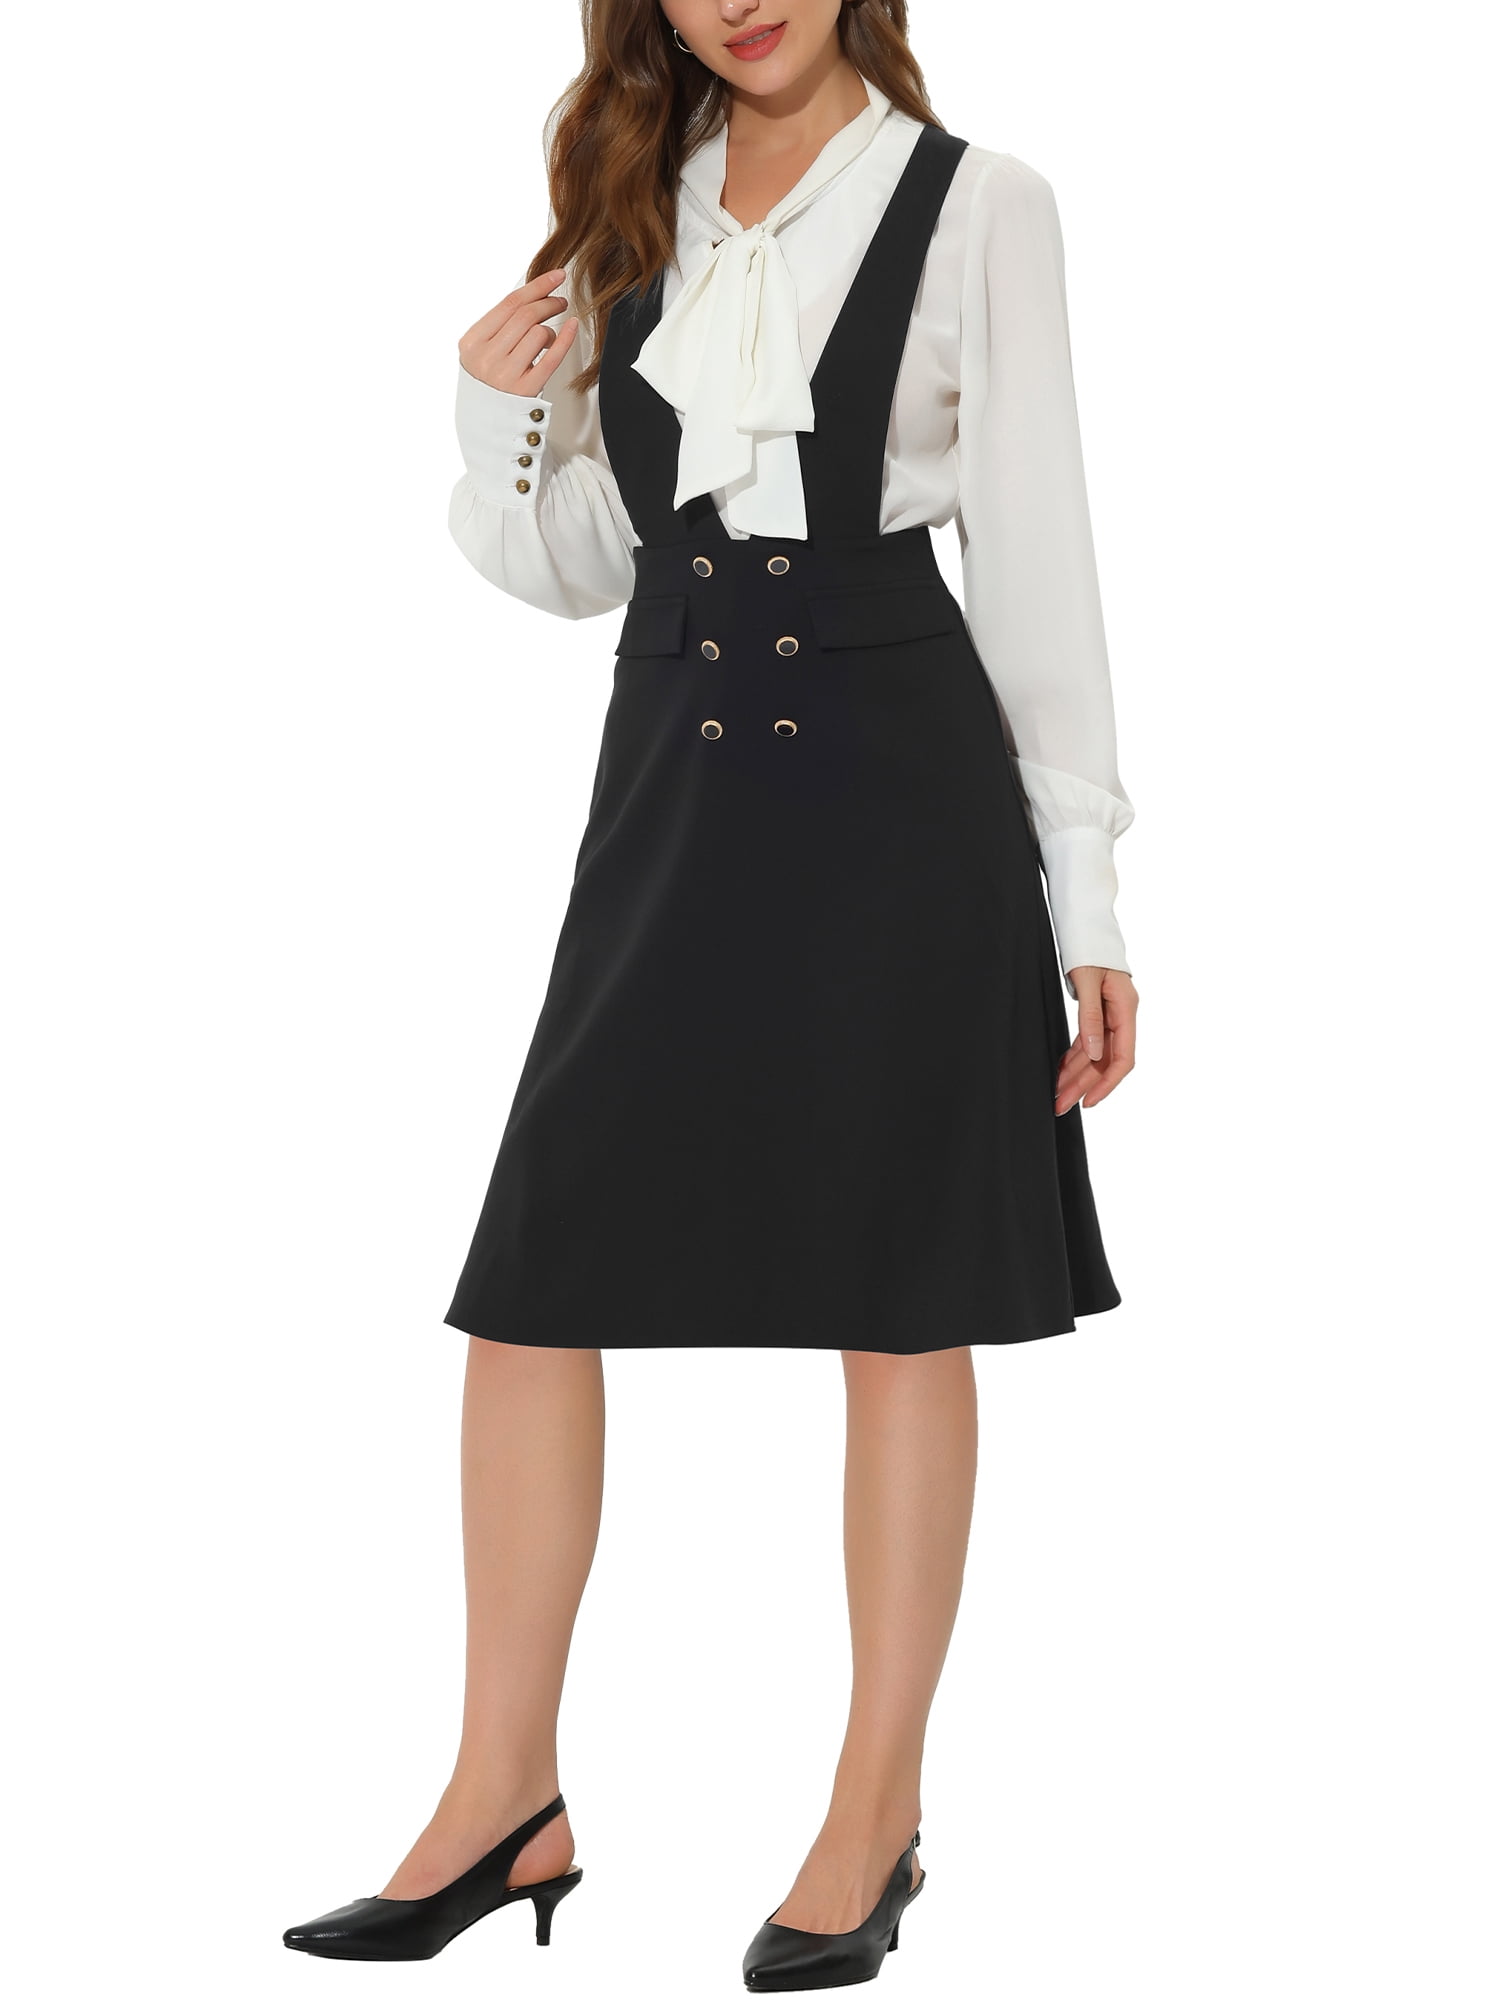 Update more than 250 black pinafore skirt best